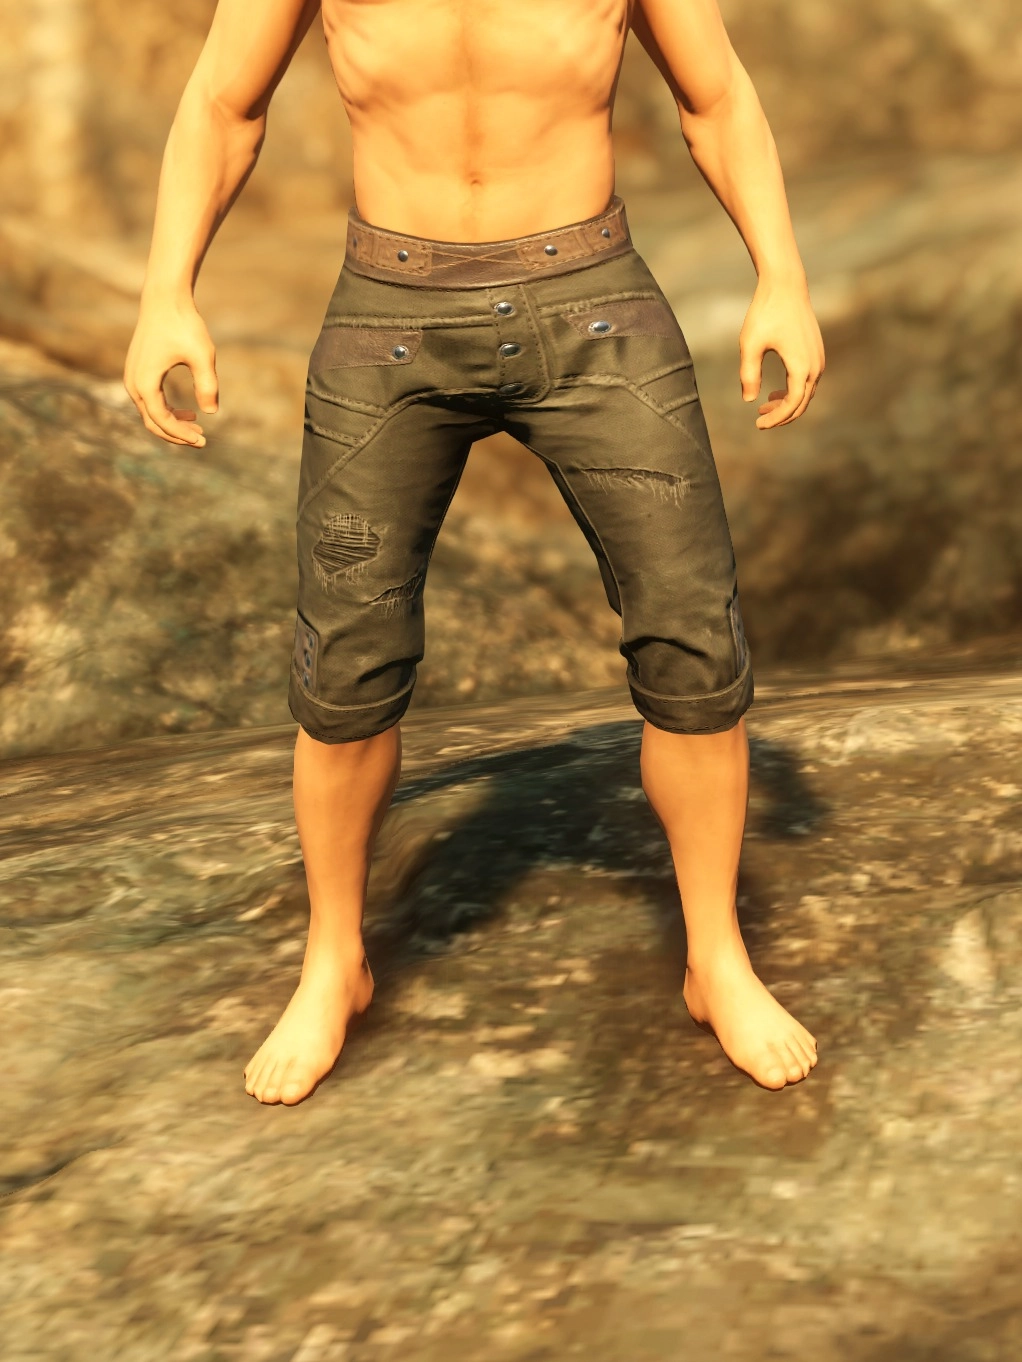 Brined Pants of the Sentry